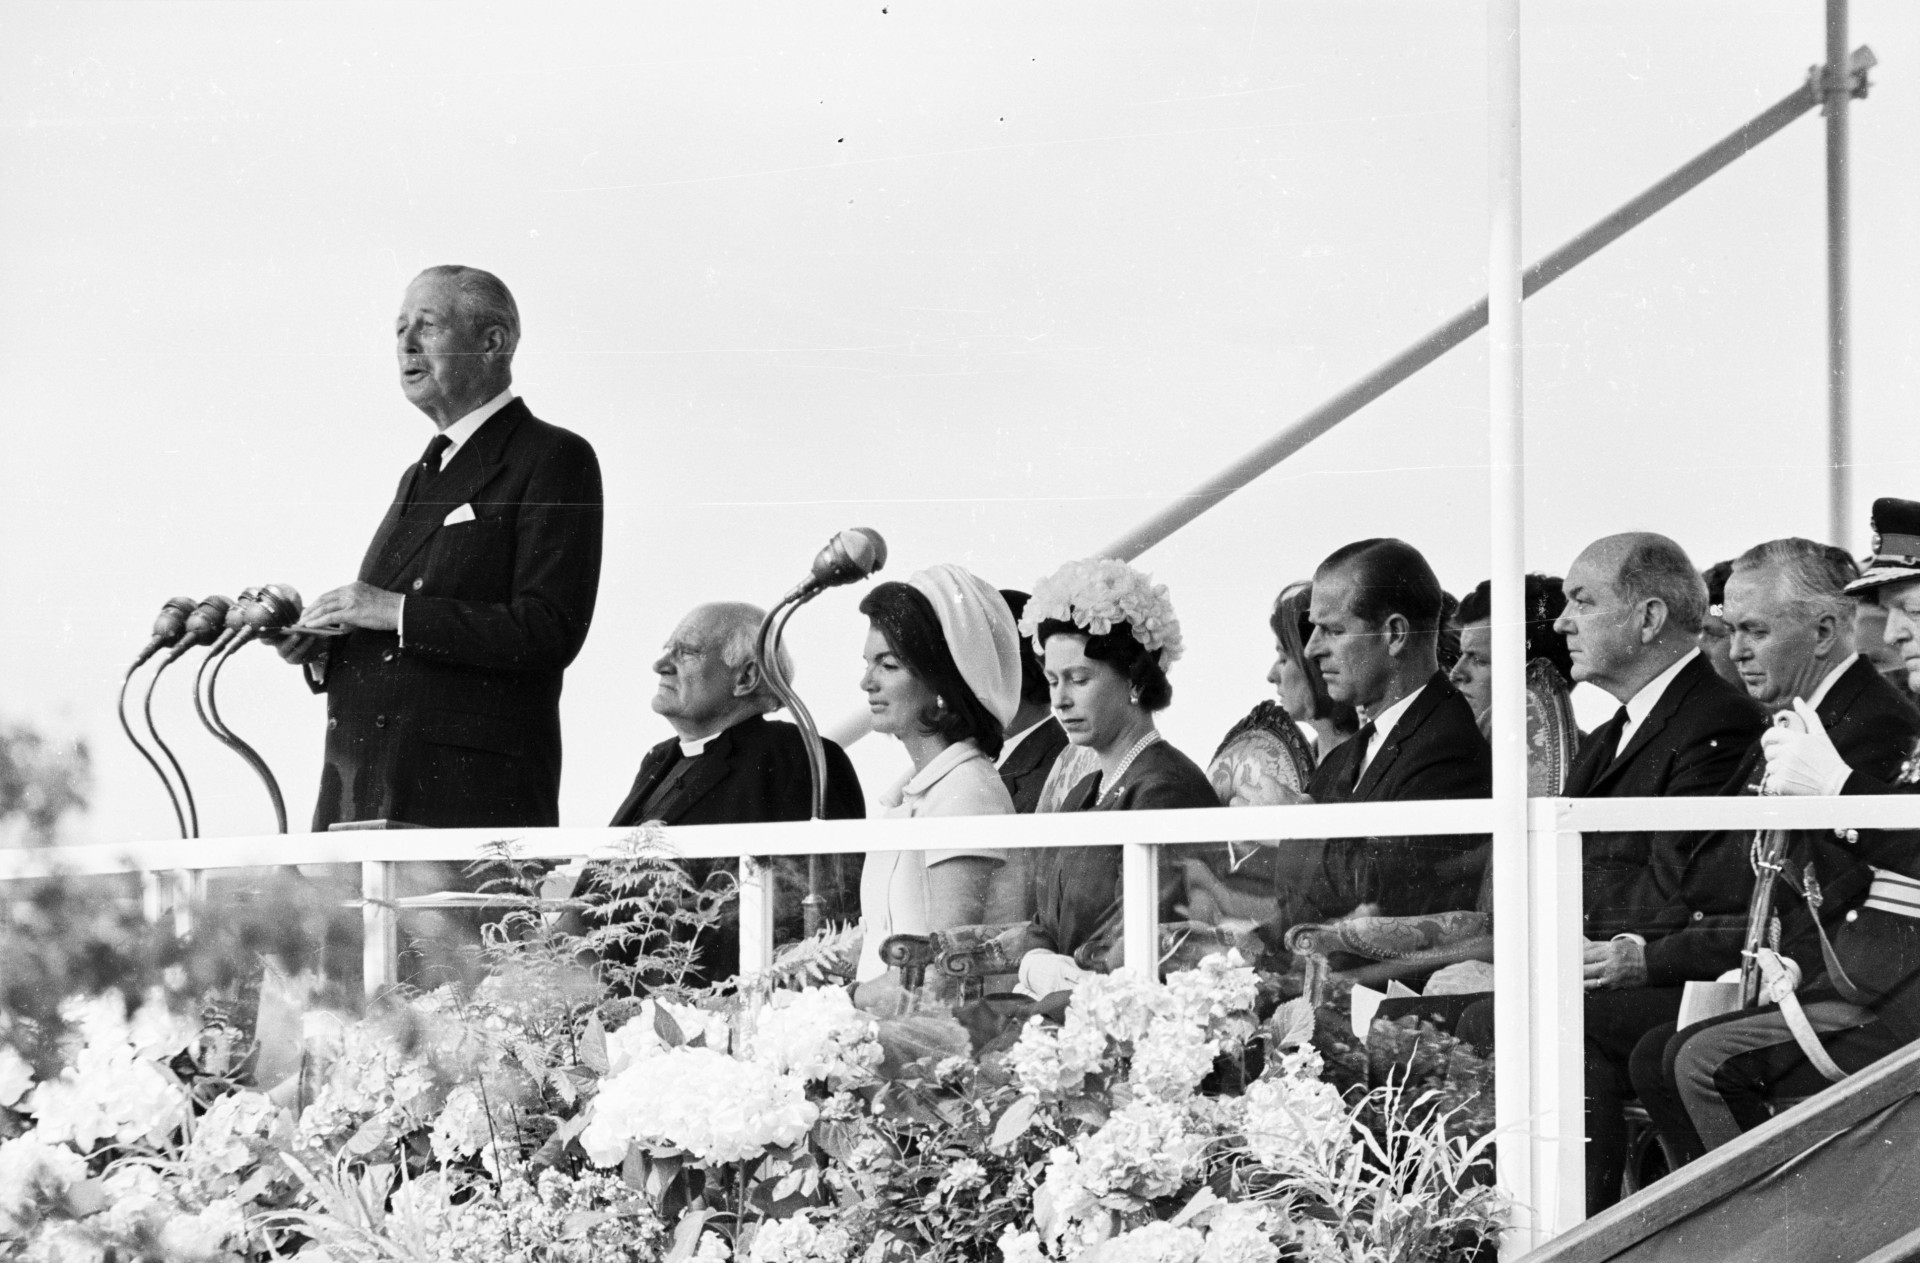 Harold Macmillan gives a speech at the memorial to John F Kennedy. Behind him on the stand are Jackie Kennedy, Queen Elizabeth II, Prince Philip, and British Prime Minister Harold Wilson.<p><a href="https://www.msn.com/en-nz/community/channel/vid-7xx8mnucu55yw63we9va2gwr7uihbxwc68fxqp25x6tg4ftibpra?cvid=94631541bc0f4f89bfd59158d696ad7e">Follow us and access great exclusive content every day</a></p>